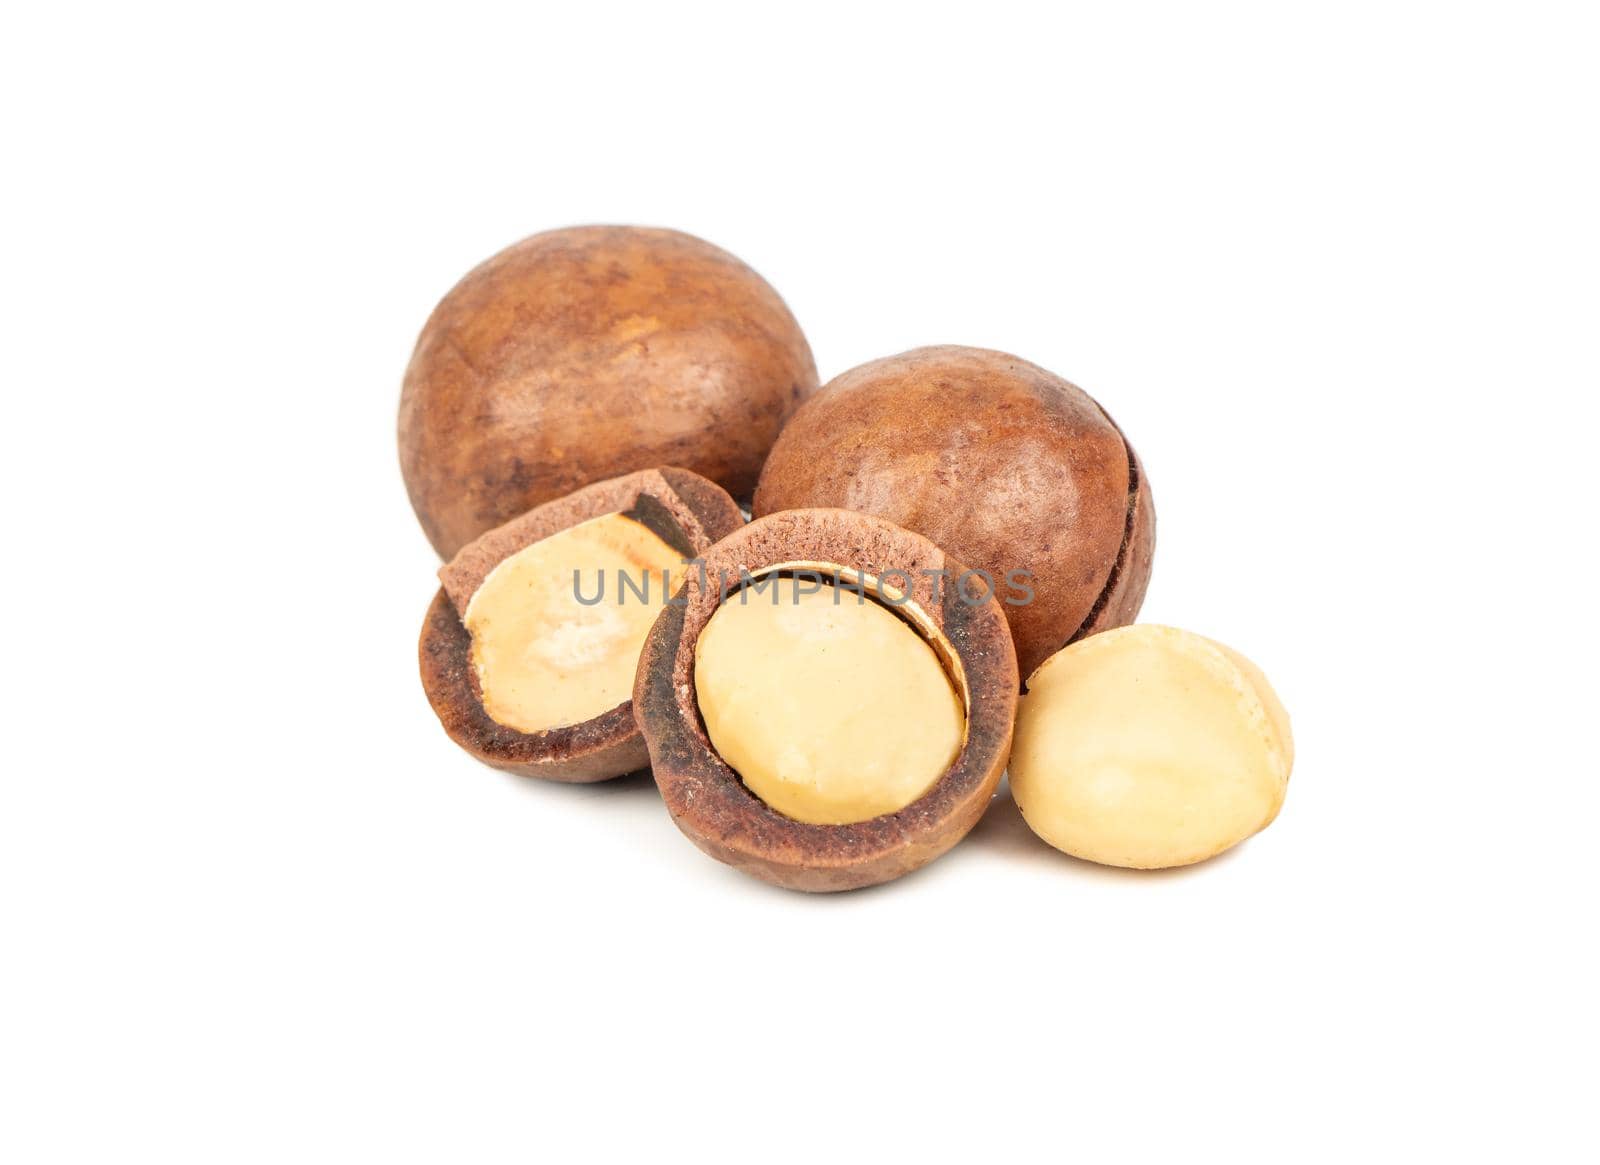 Split macadamia nuts with whole ones on a white background